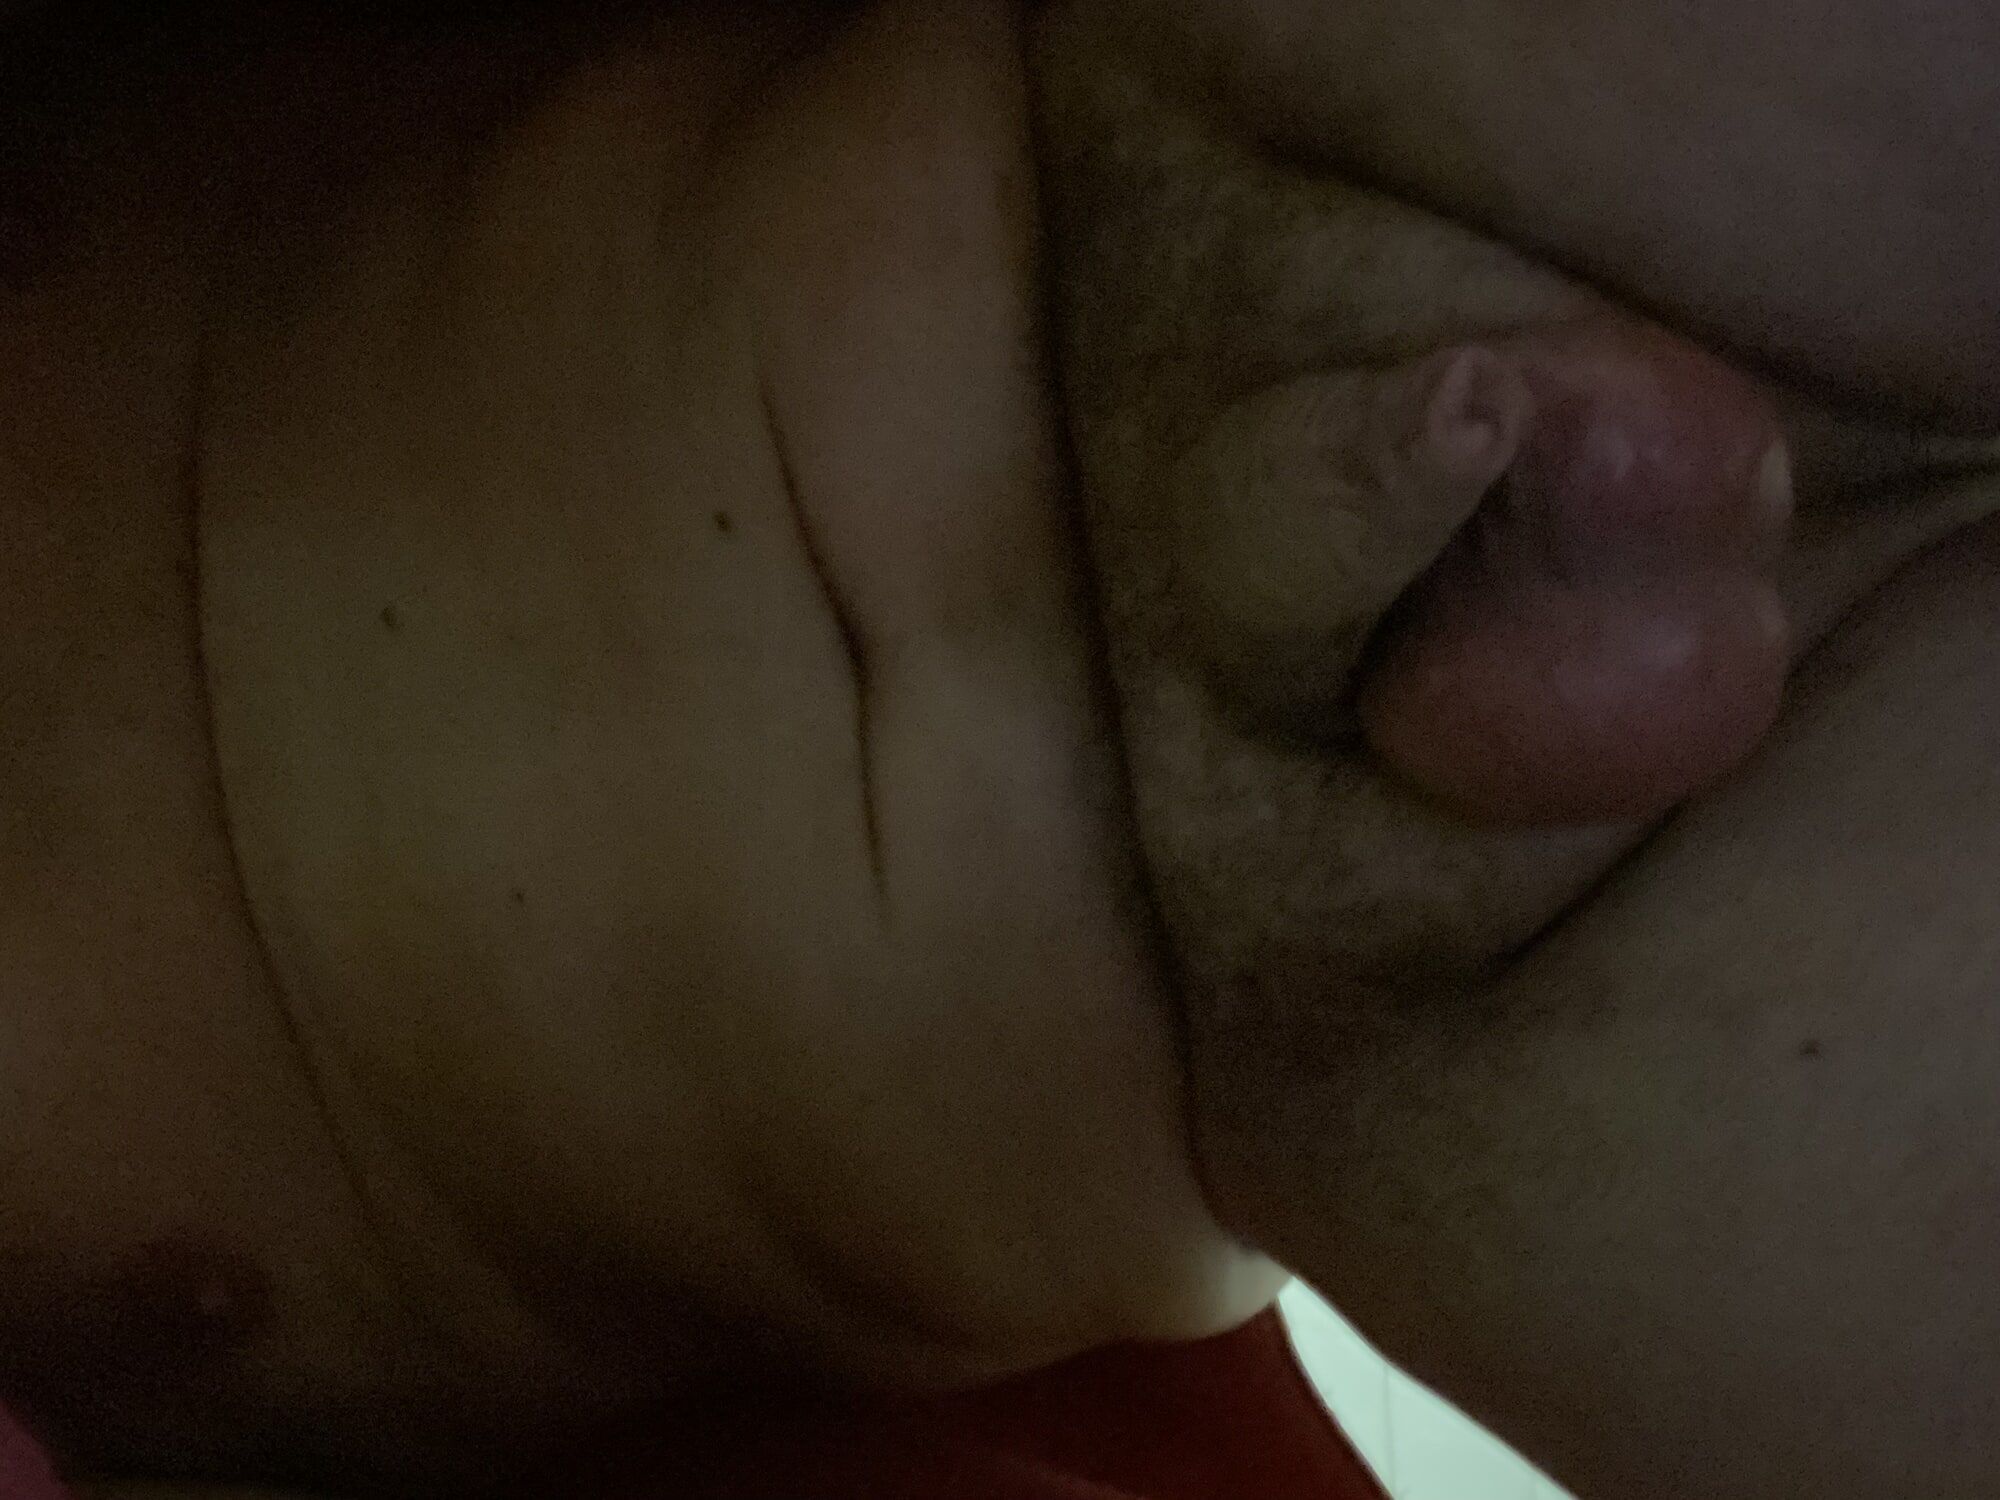 Does anyone want to play with my cock and balls 